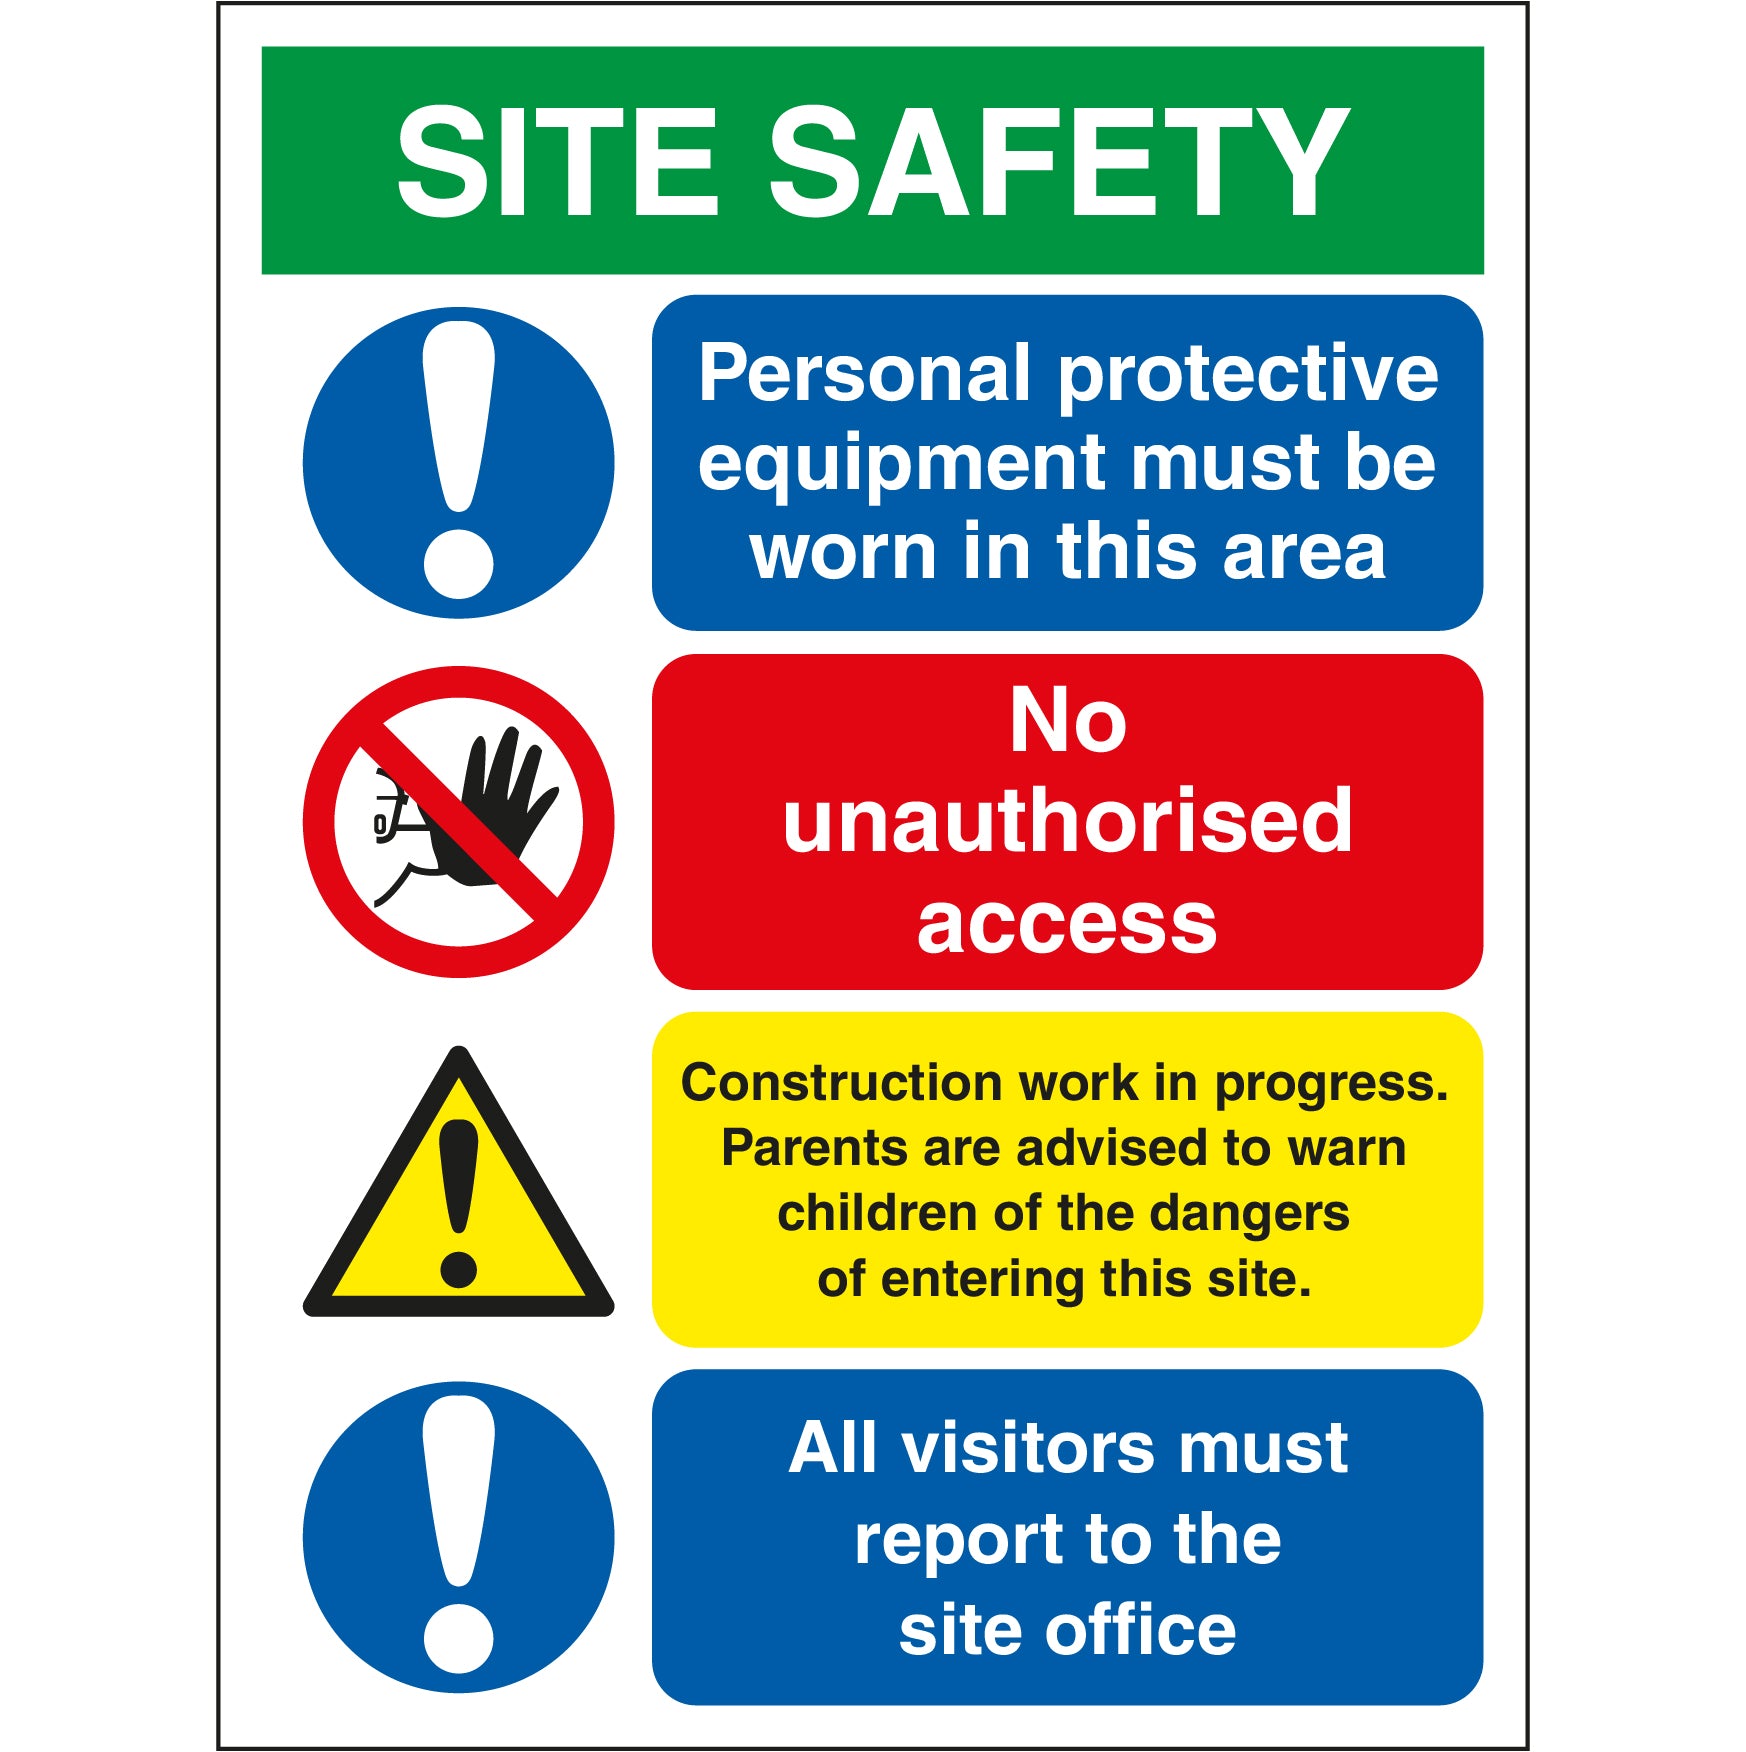 Site Safety Board Ppe Unauthorised Access Construction Site Visit